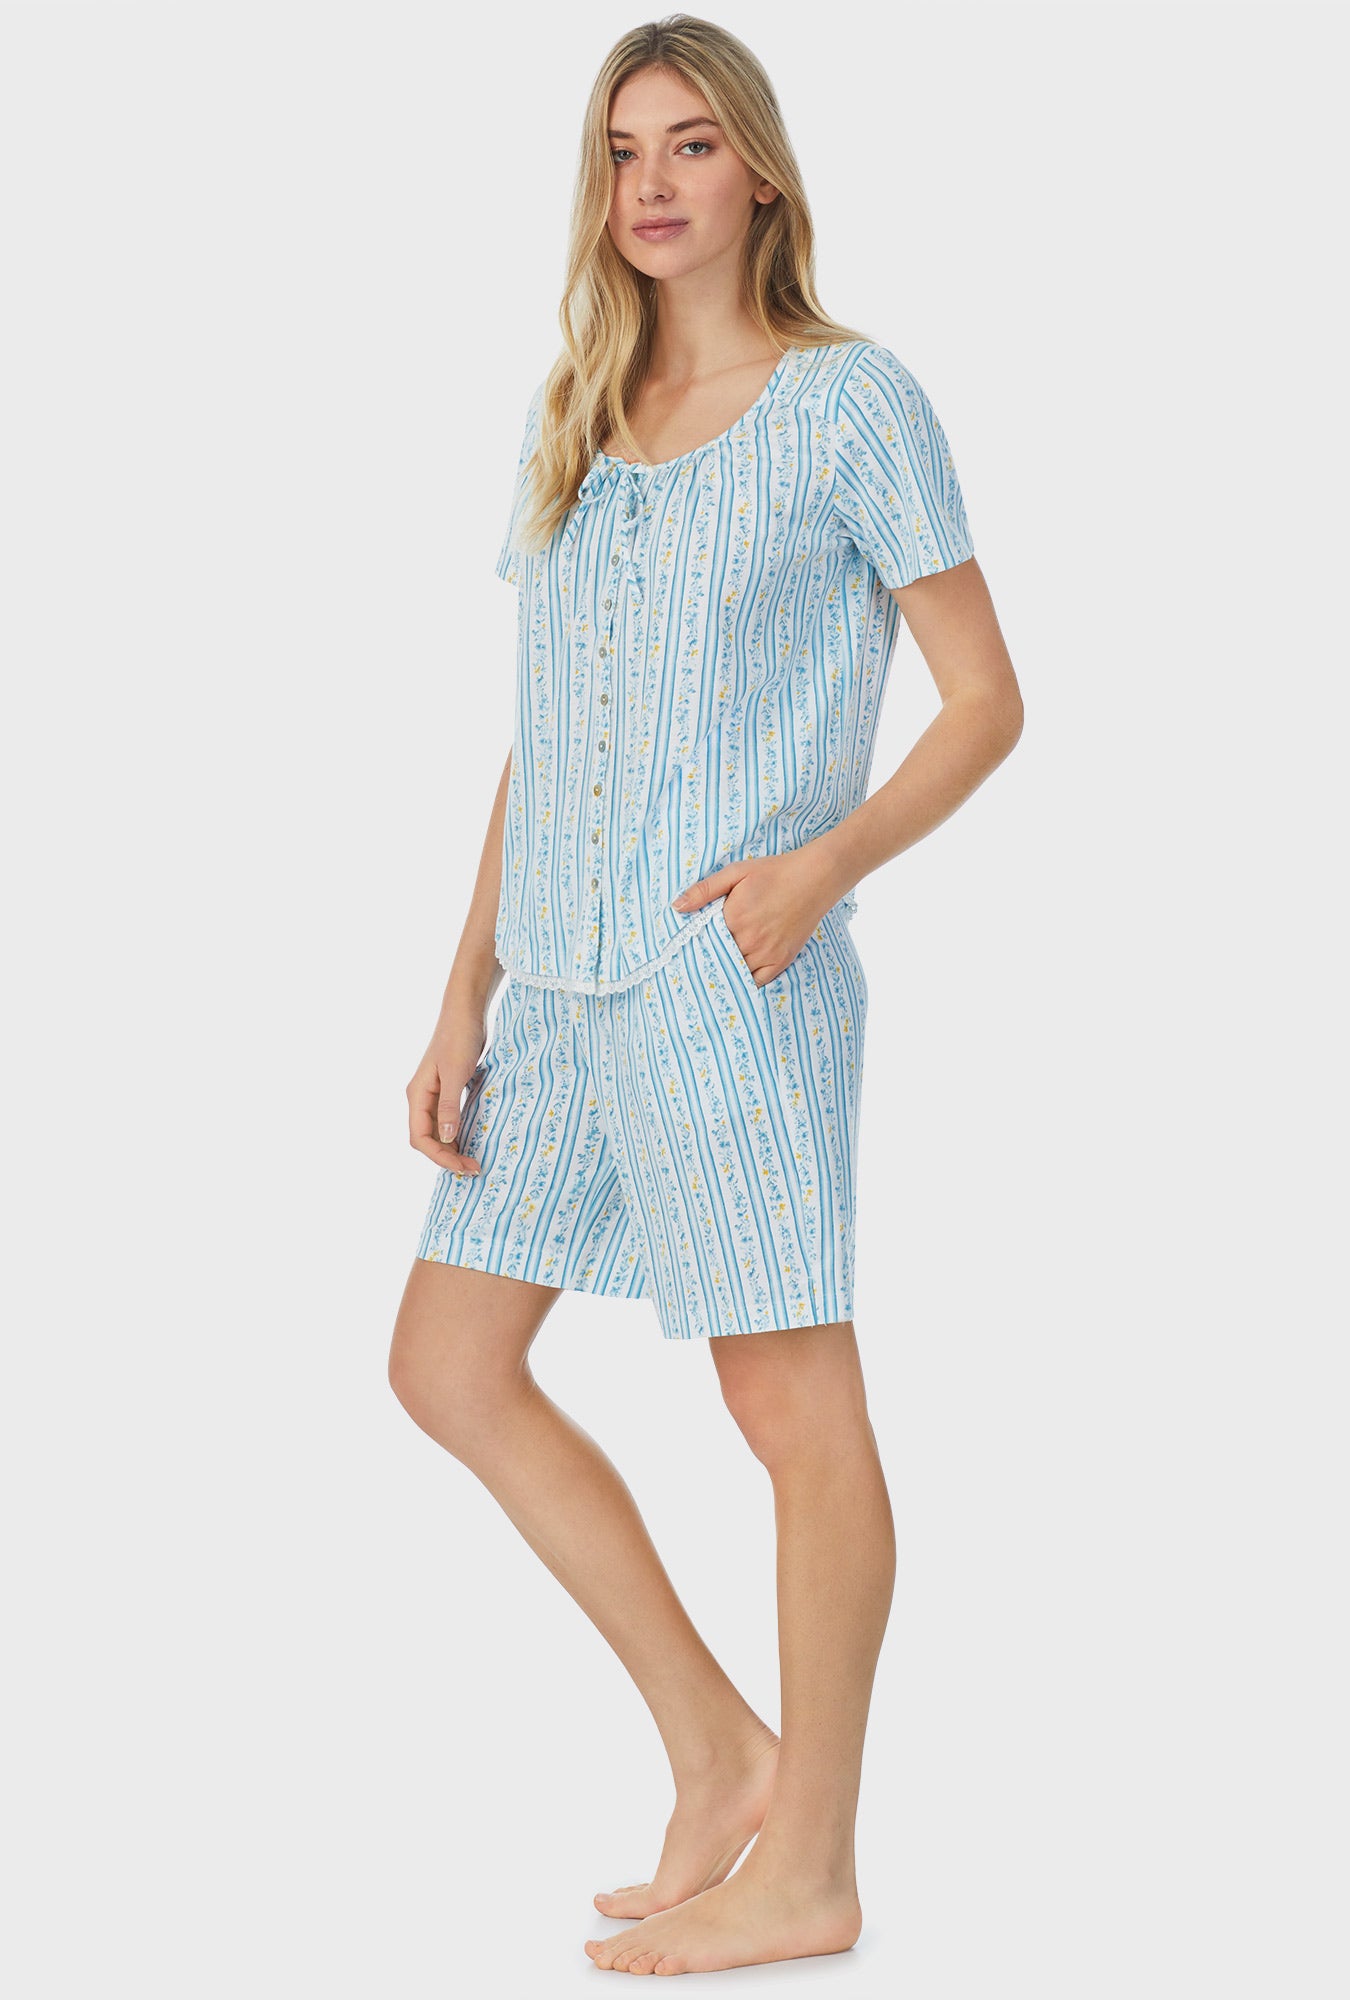 A lady wearing blue short sleeve bermuda pajama set with floral stripes.